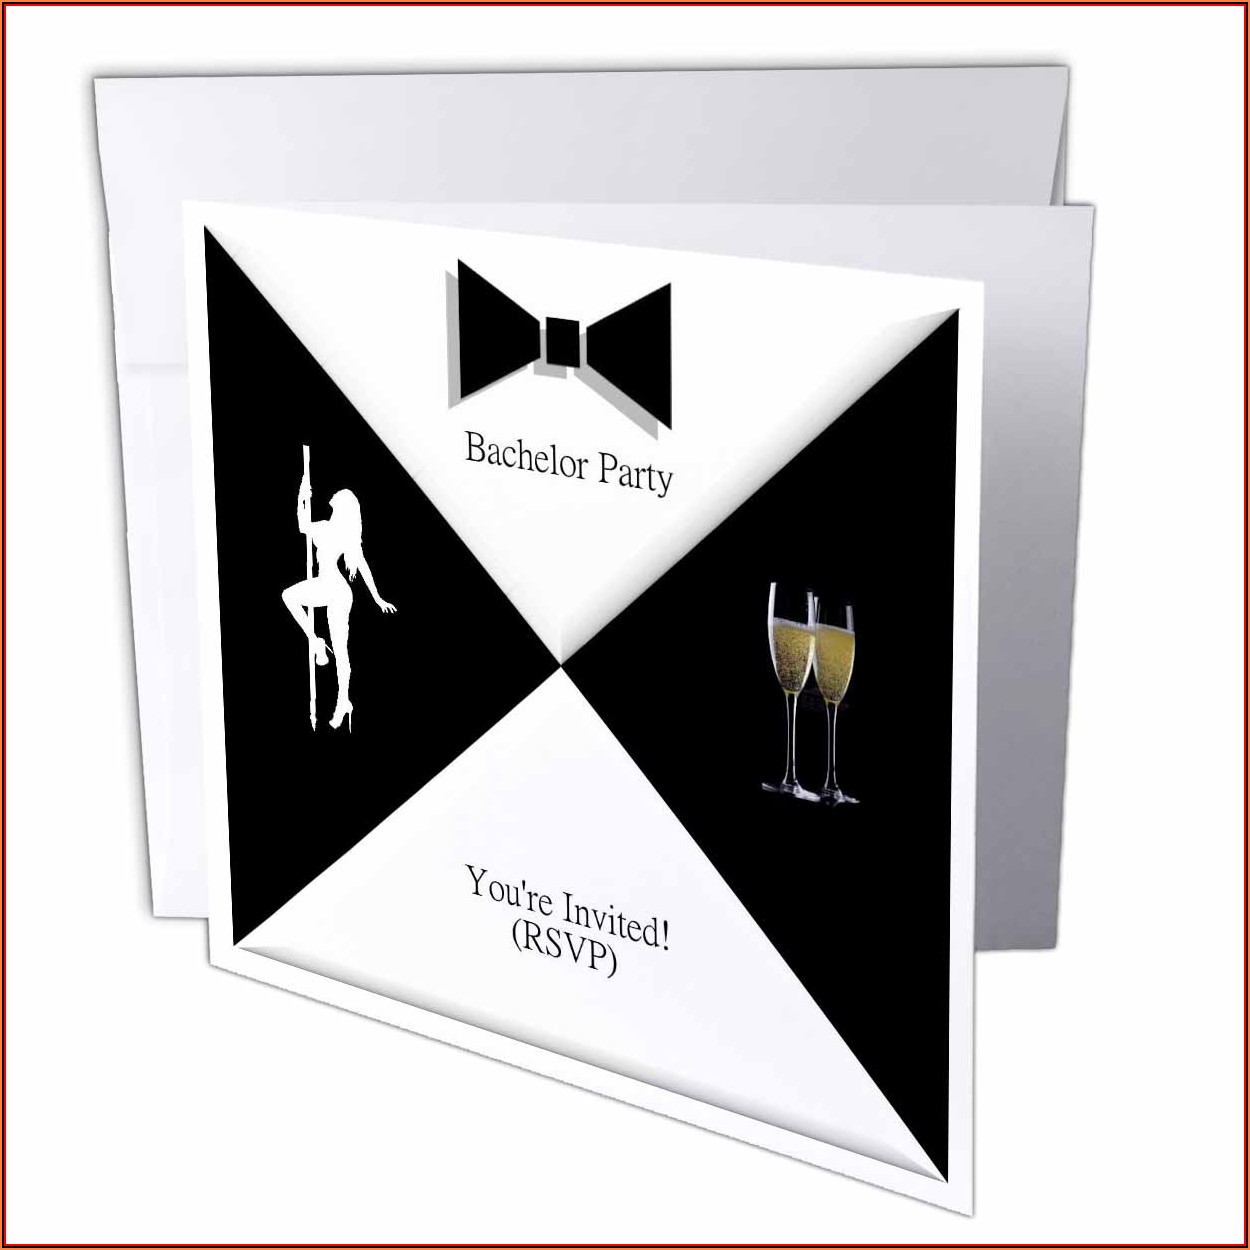 Bachelor Party Invitation Cards